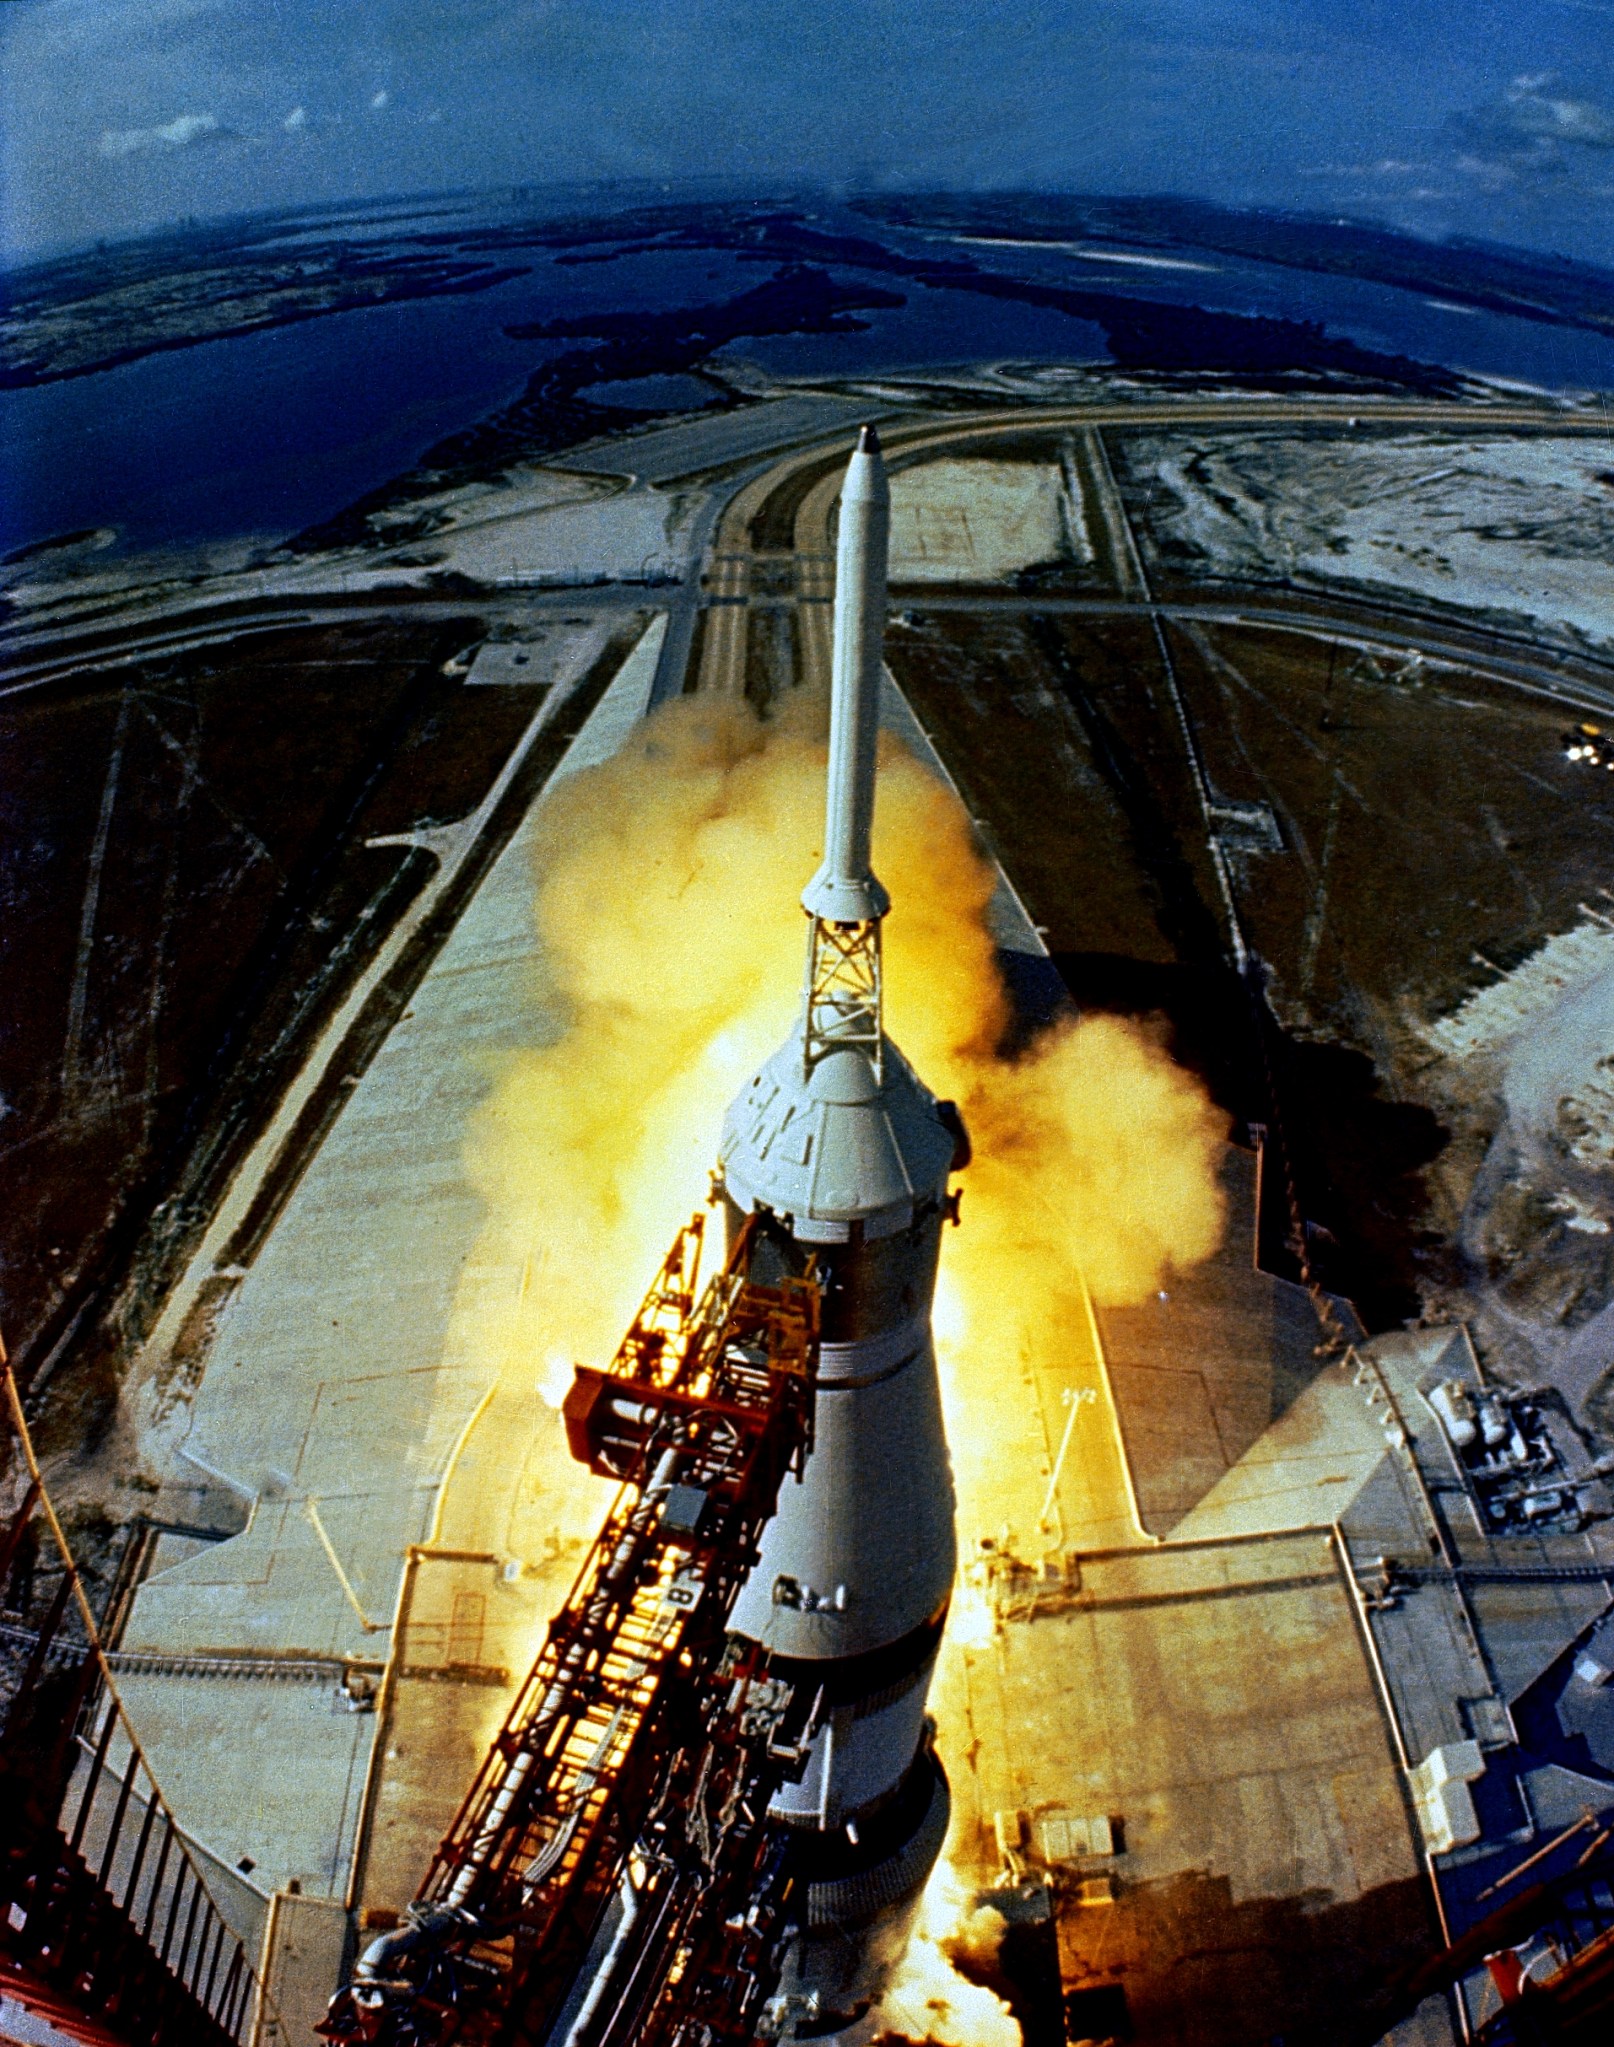 The Saturn V rocket with Apollo 11 launched to the Moon on July 19, 1969 at 9:32 a.m. EDT from Launch Pad 39A at KSC.